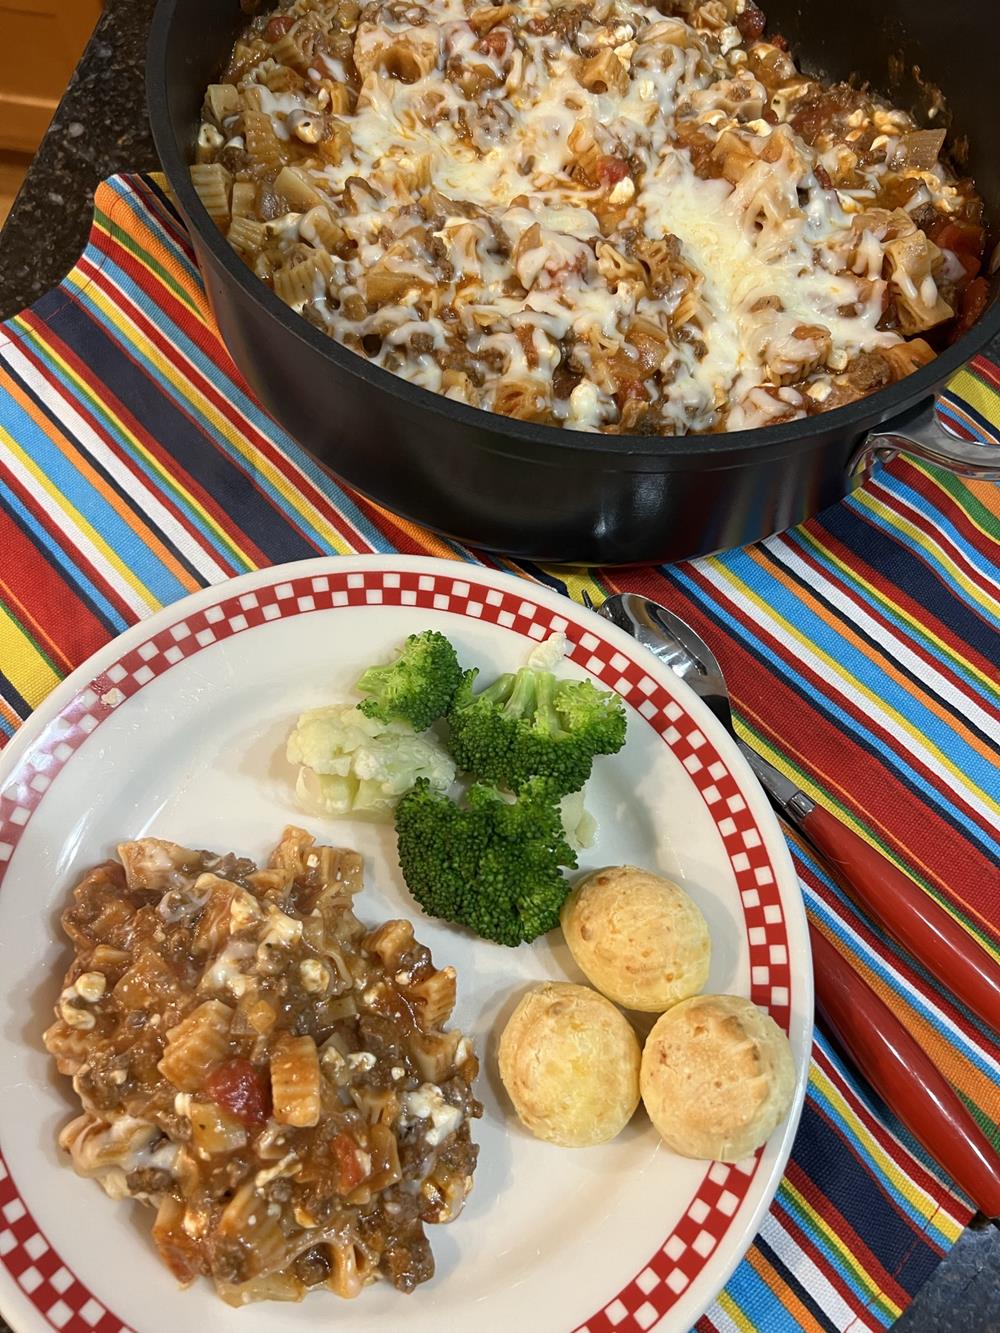 skillet lasagna on a red and white plate with broccoli and rolls